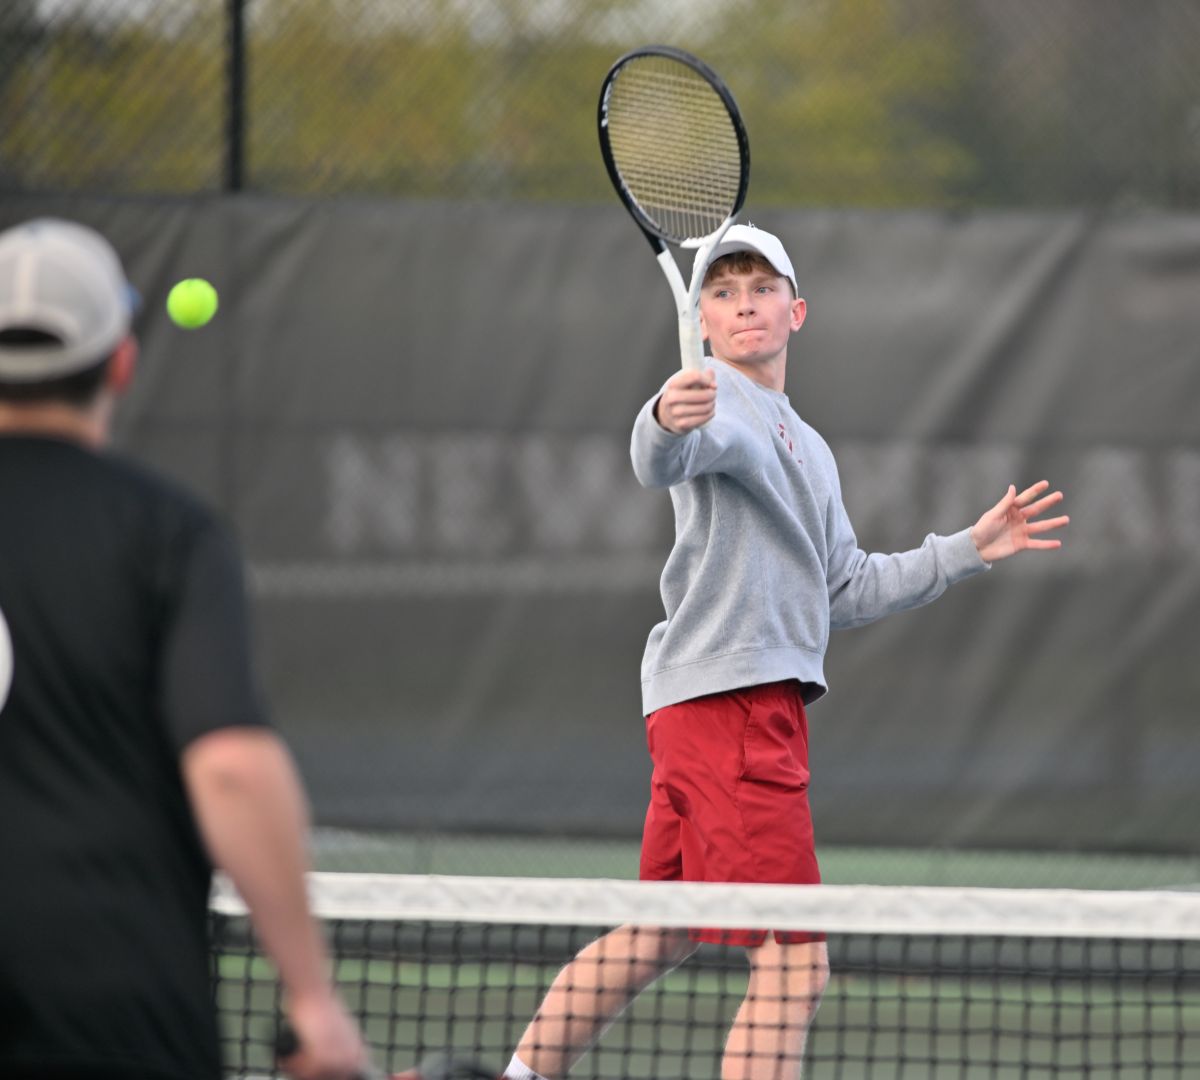 dover-at-np-tennis-4-4-24-26.jpg